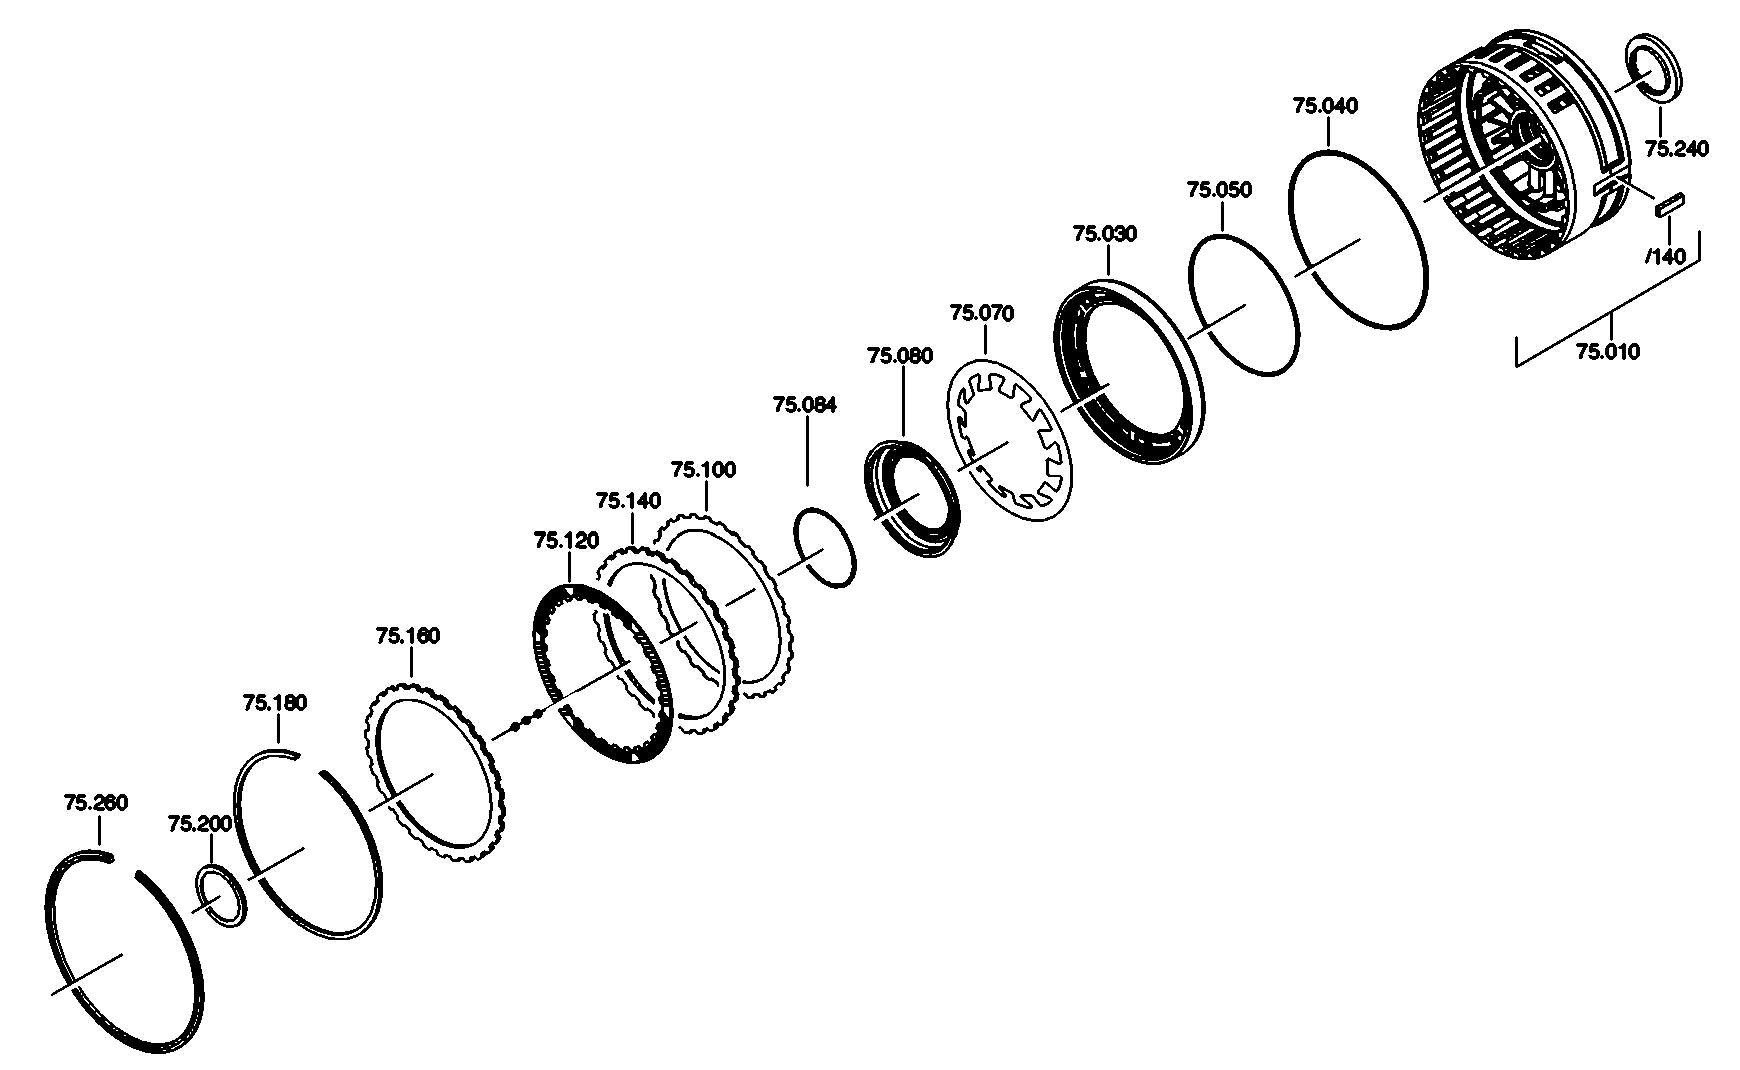 drawing for UNIPART 02JLM 1051 - ROUND SEALING RING (figure 5)